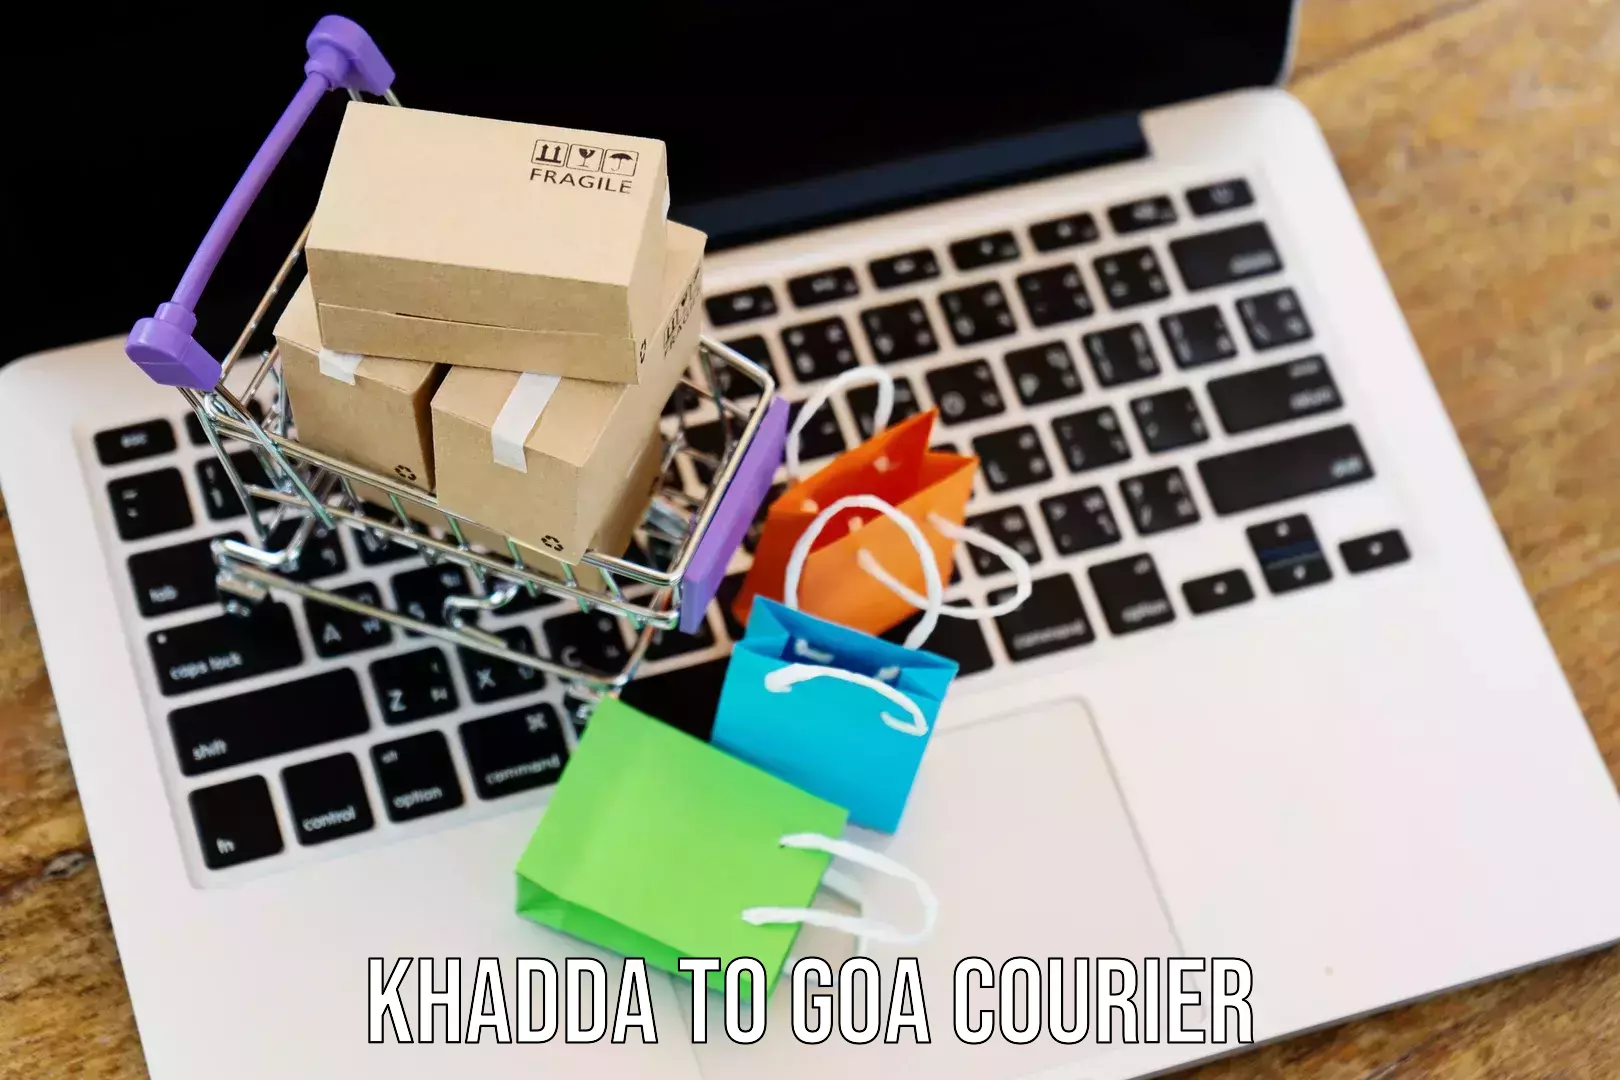 Same-day delivery options Khadda to Goa